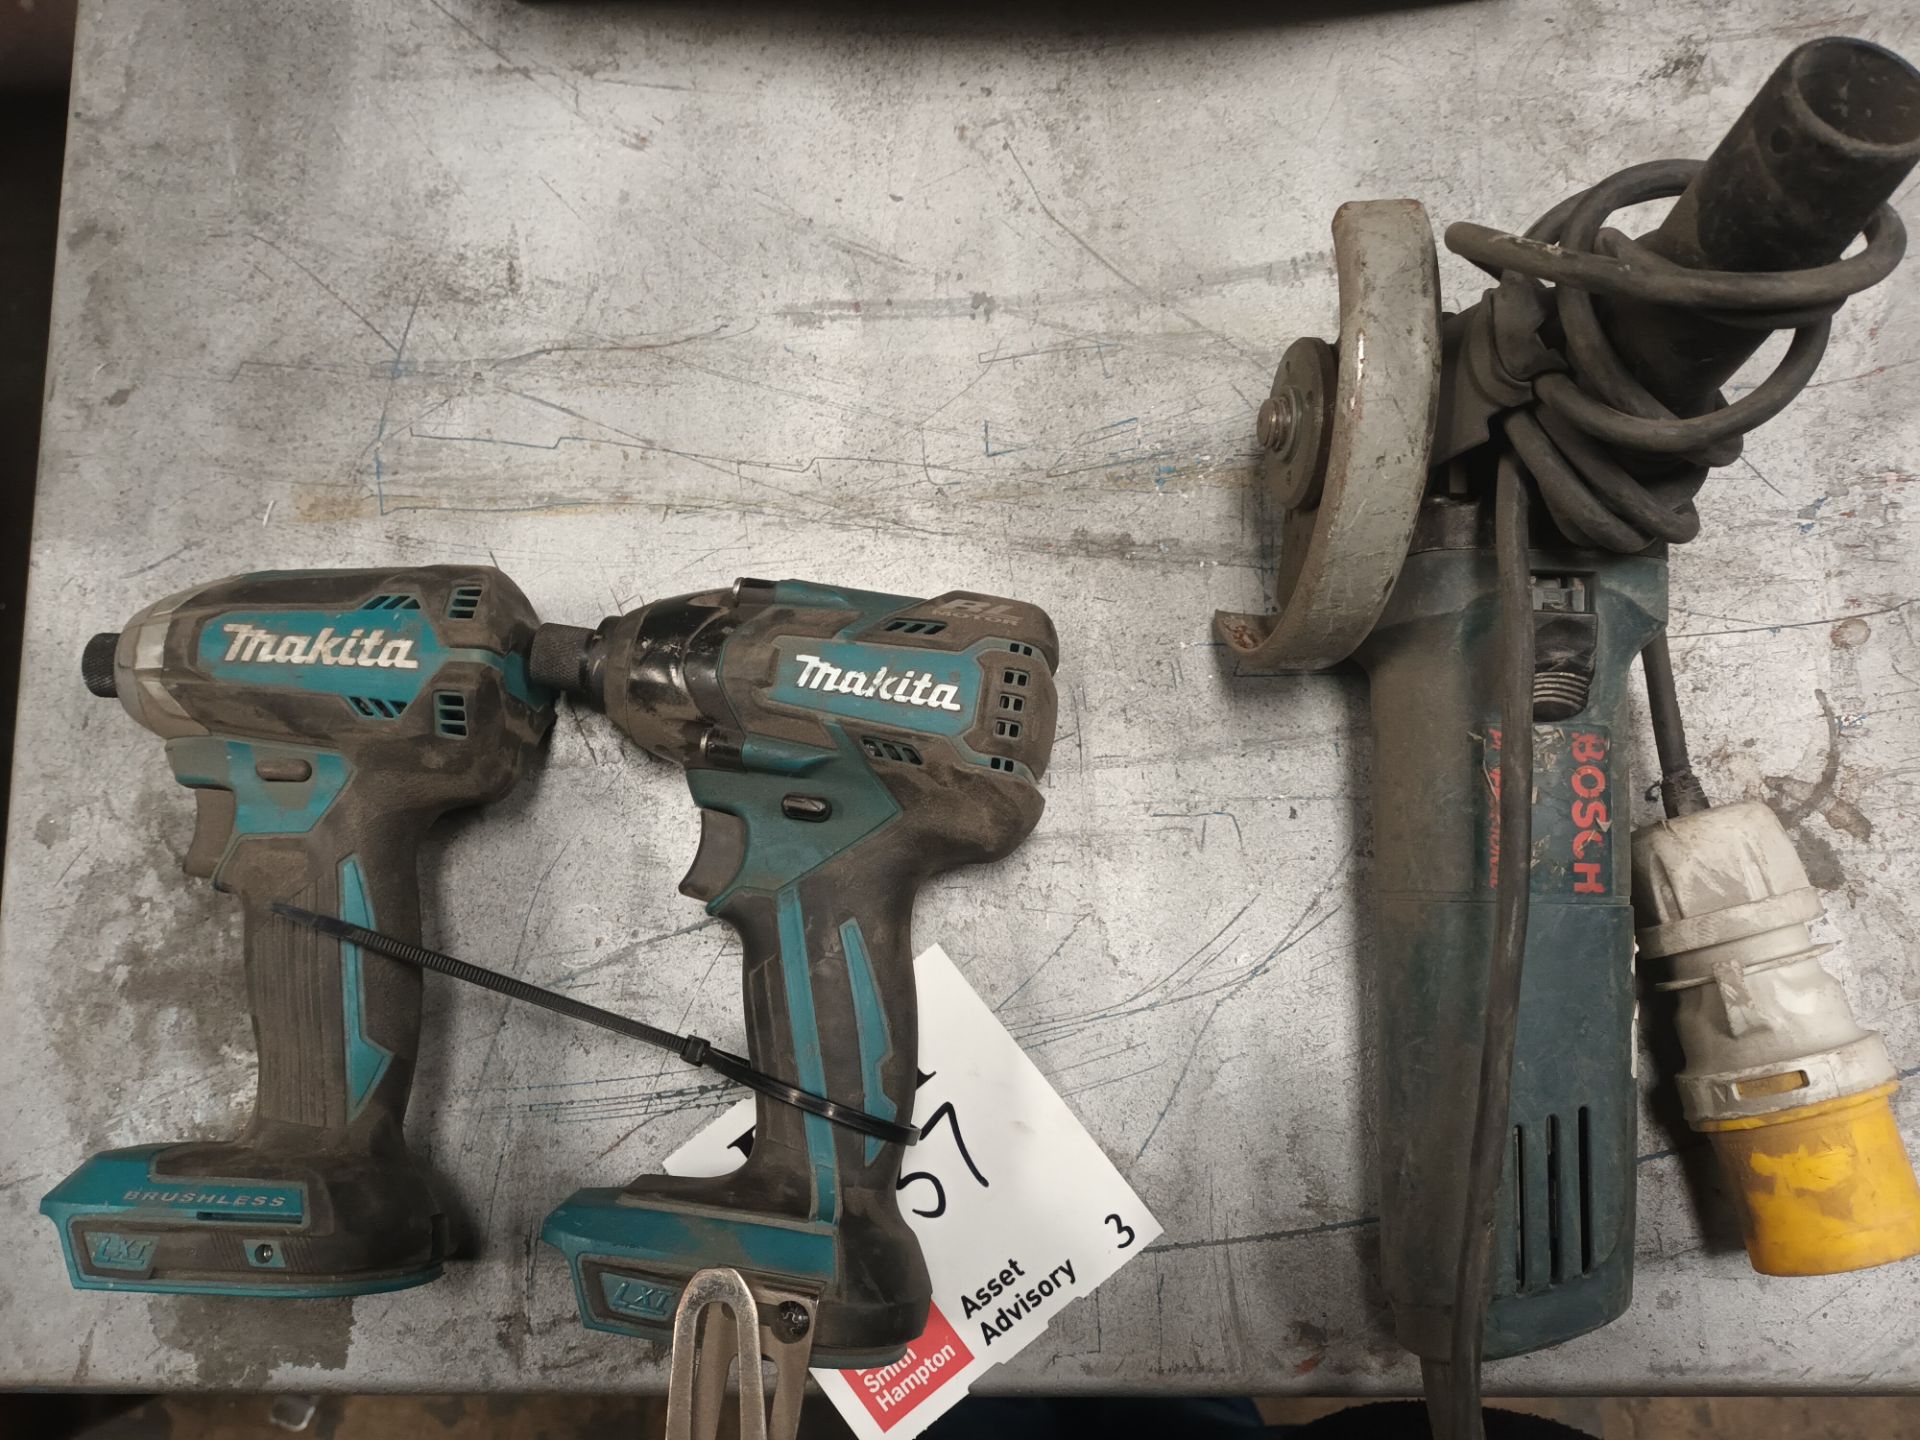 Makita DTD153 and DTD129 impact drivers (excludes battery and charger) and Bosch GWS600 240v angle g